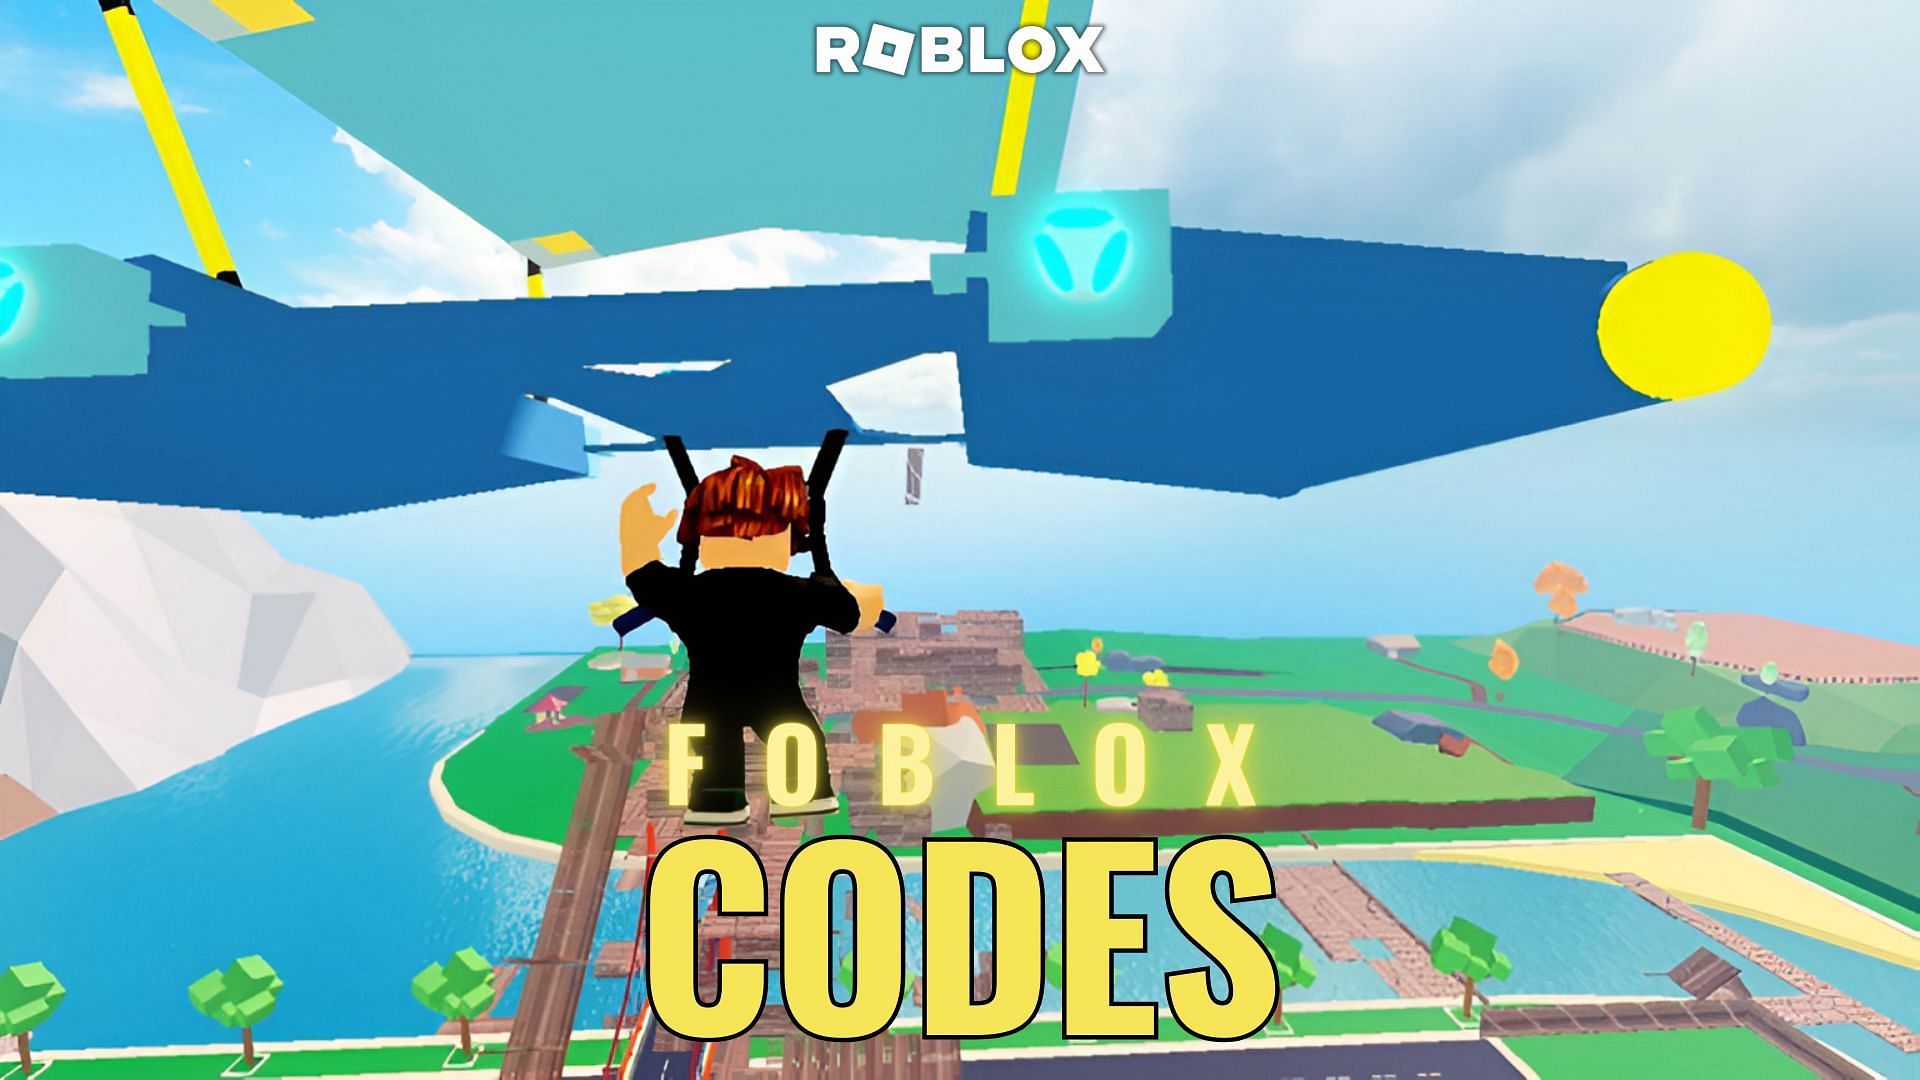 Foblox latest codes